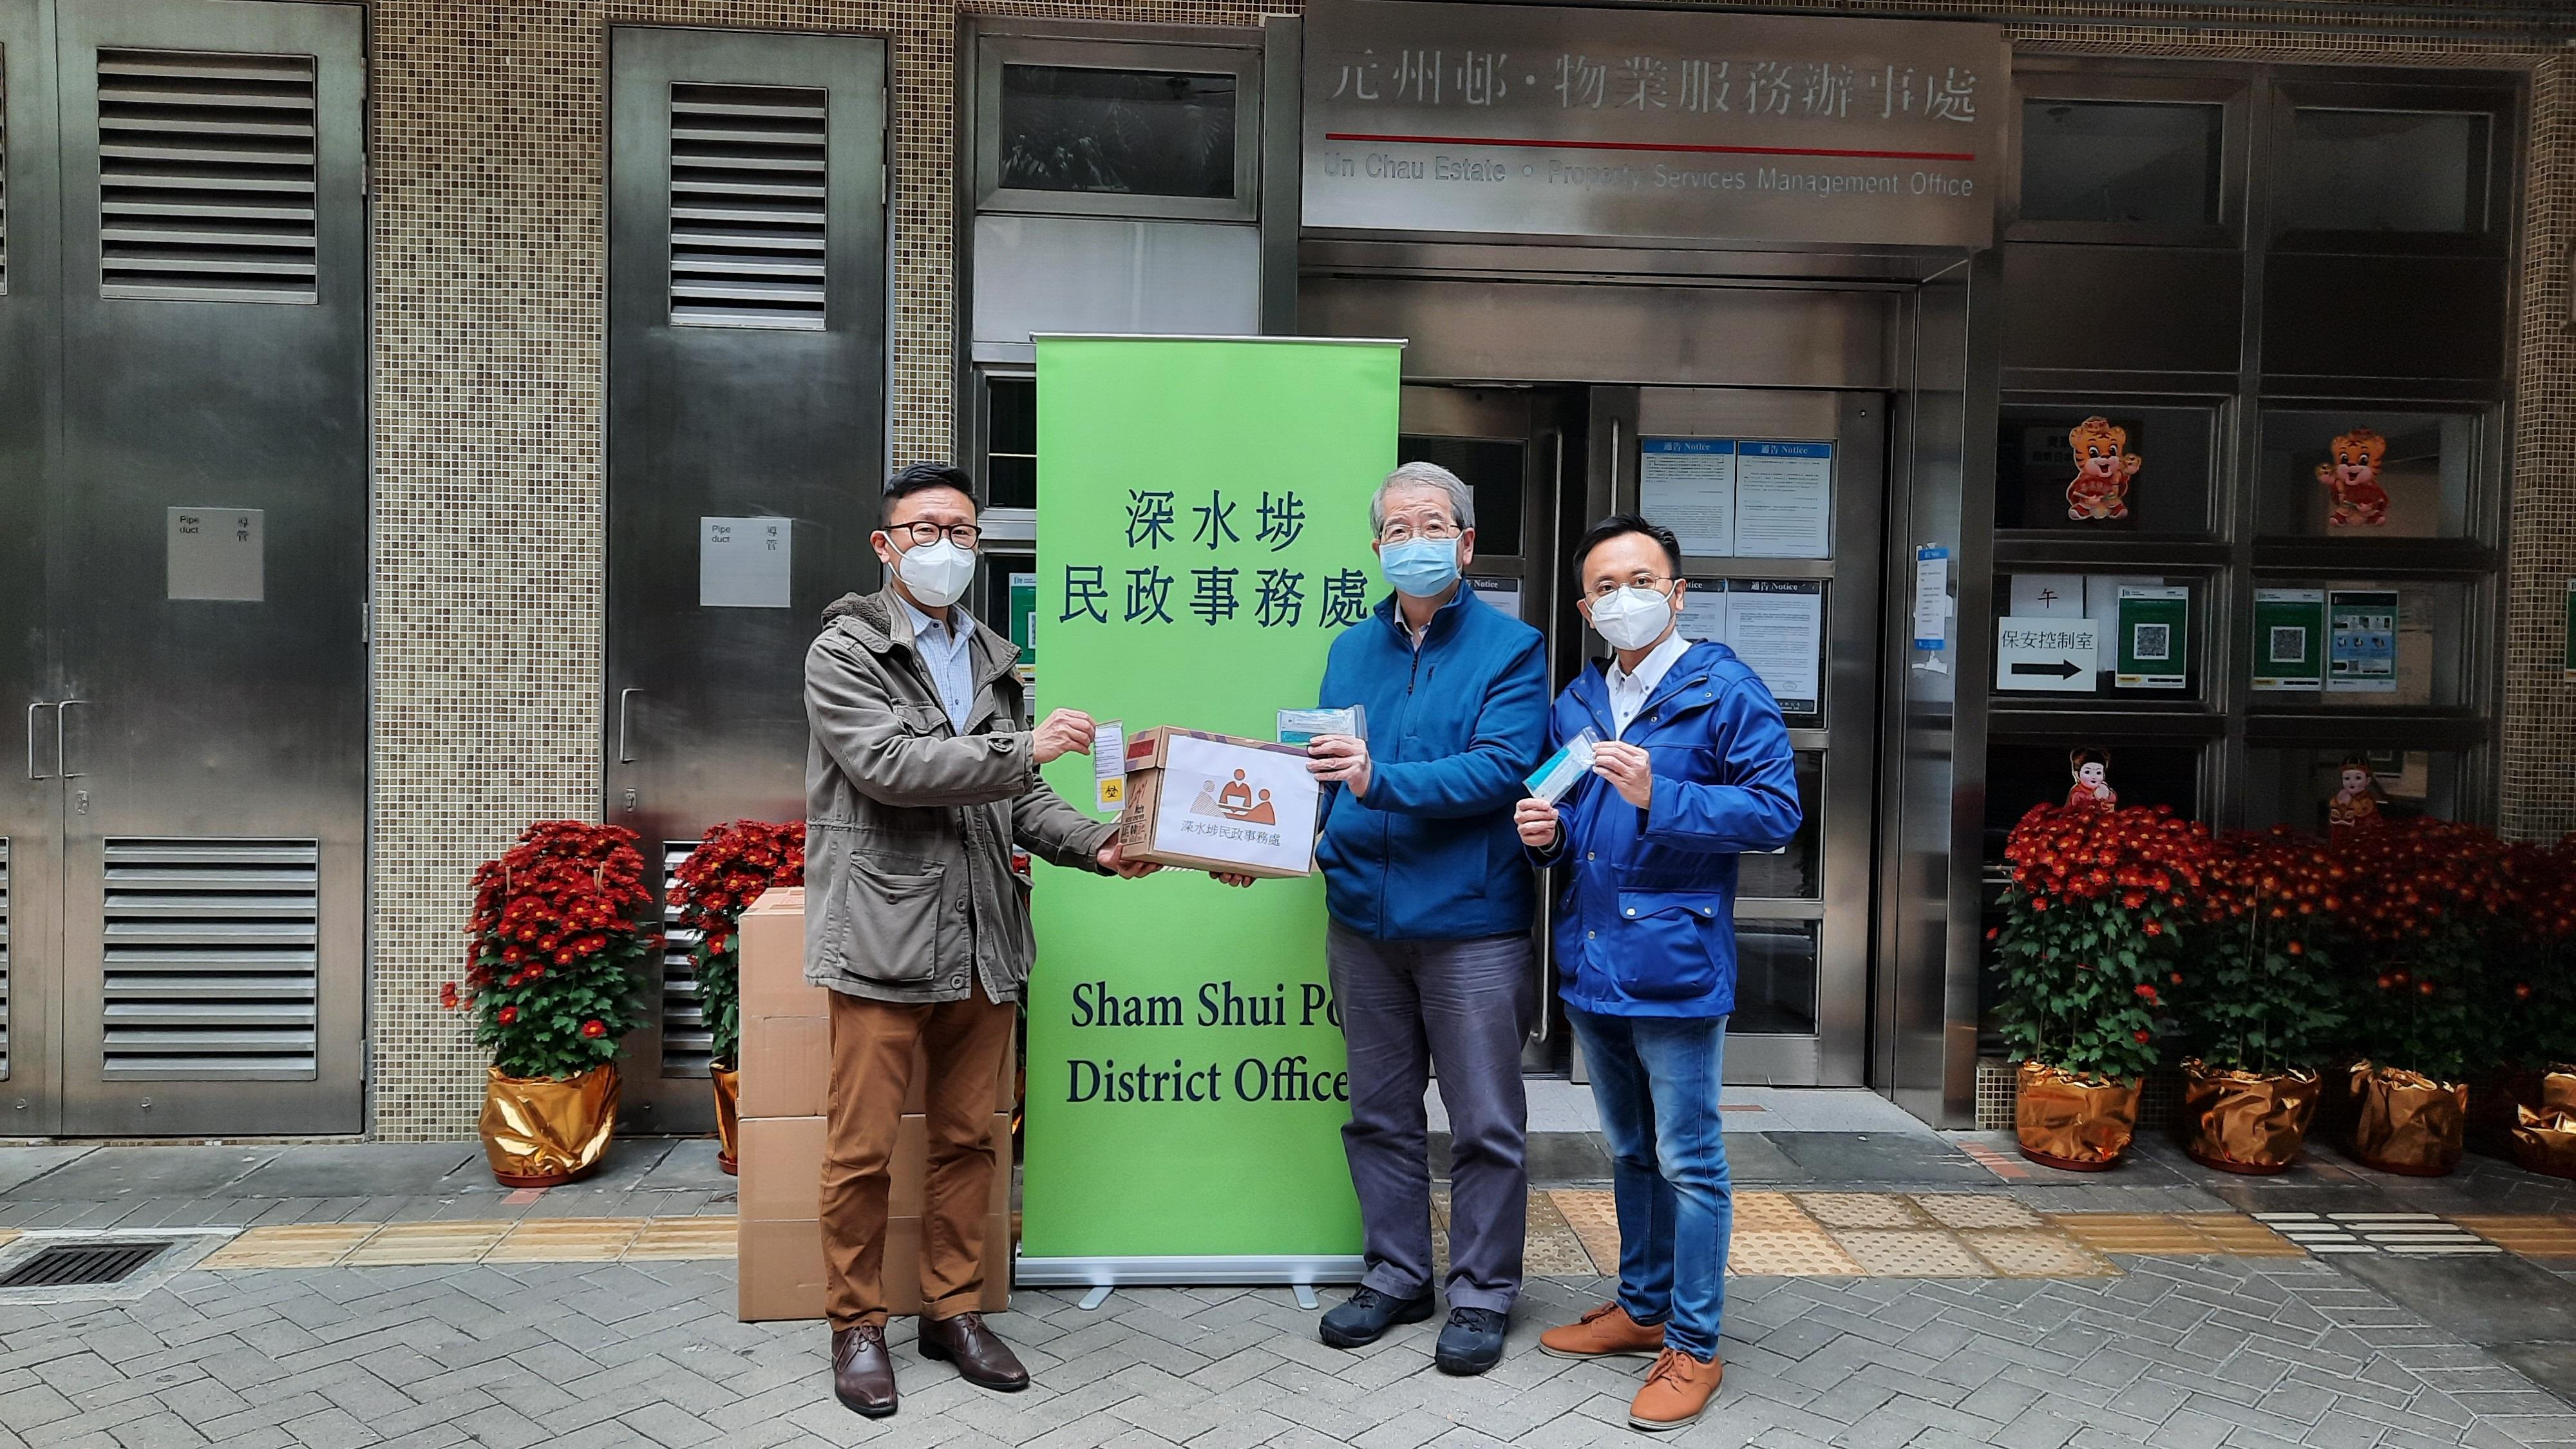 The Sham Shui Po District Office today (February 16) distributed rapid test kits to cleansing workers and property management staff working in Un Chau Estate for voluntary testing through the estate’s property management company and the Housing Department.